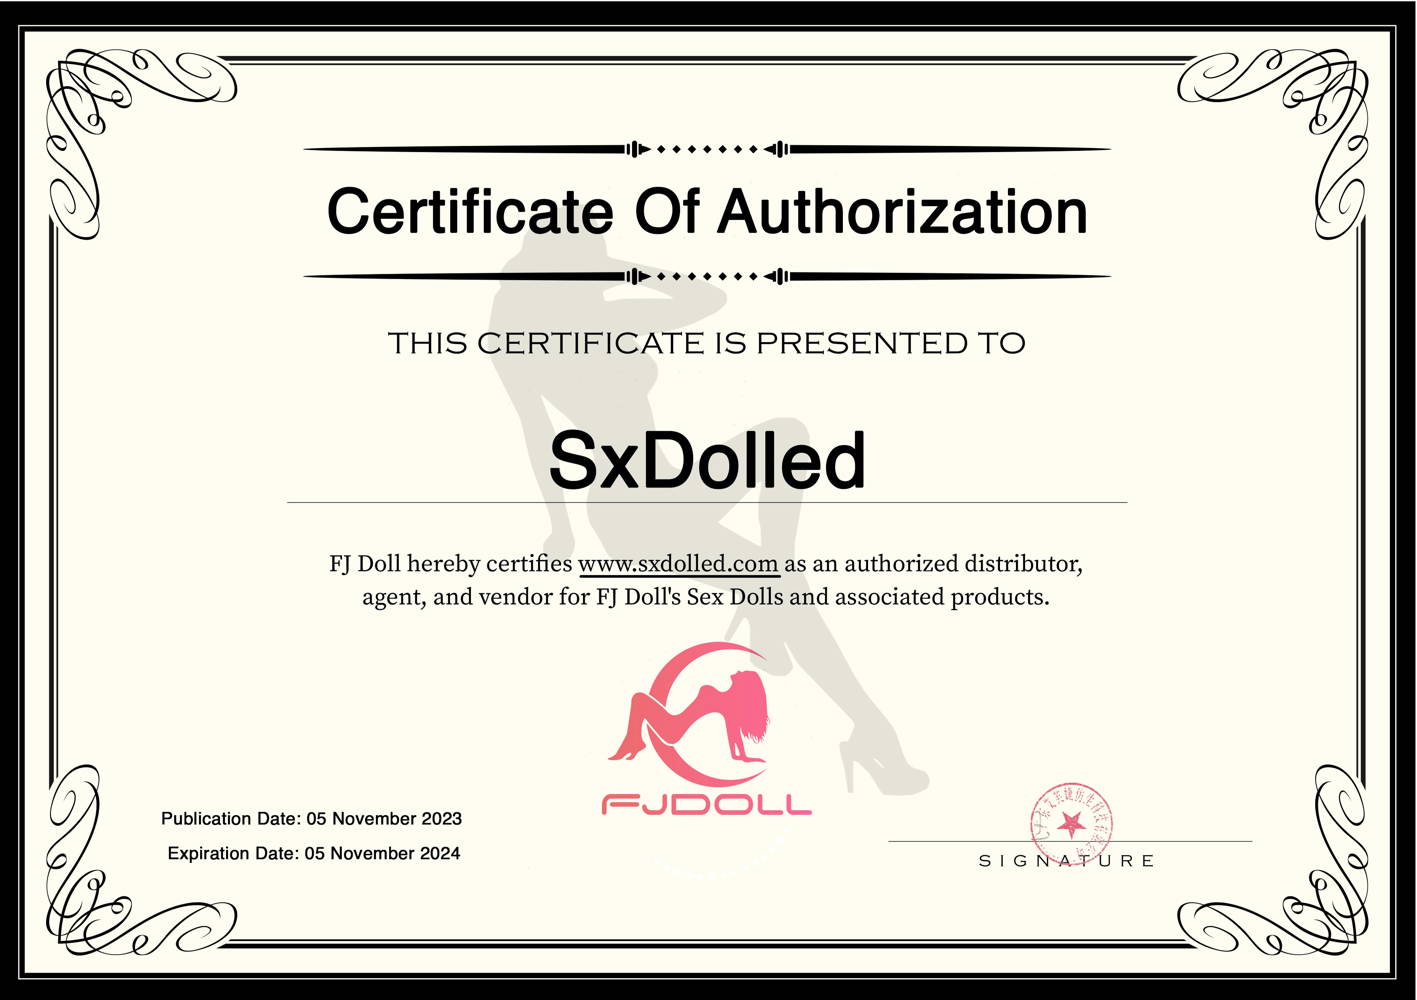 FJ Doll and SxDolled Collaboration Certificate